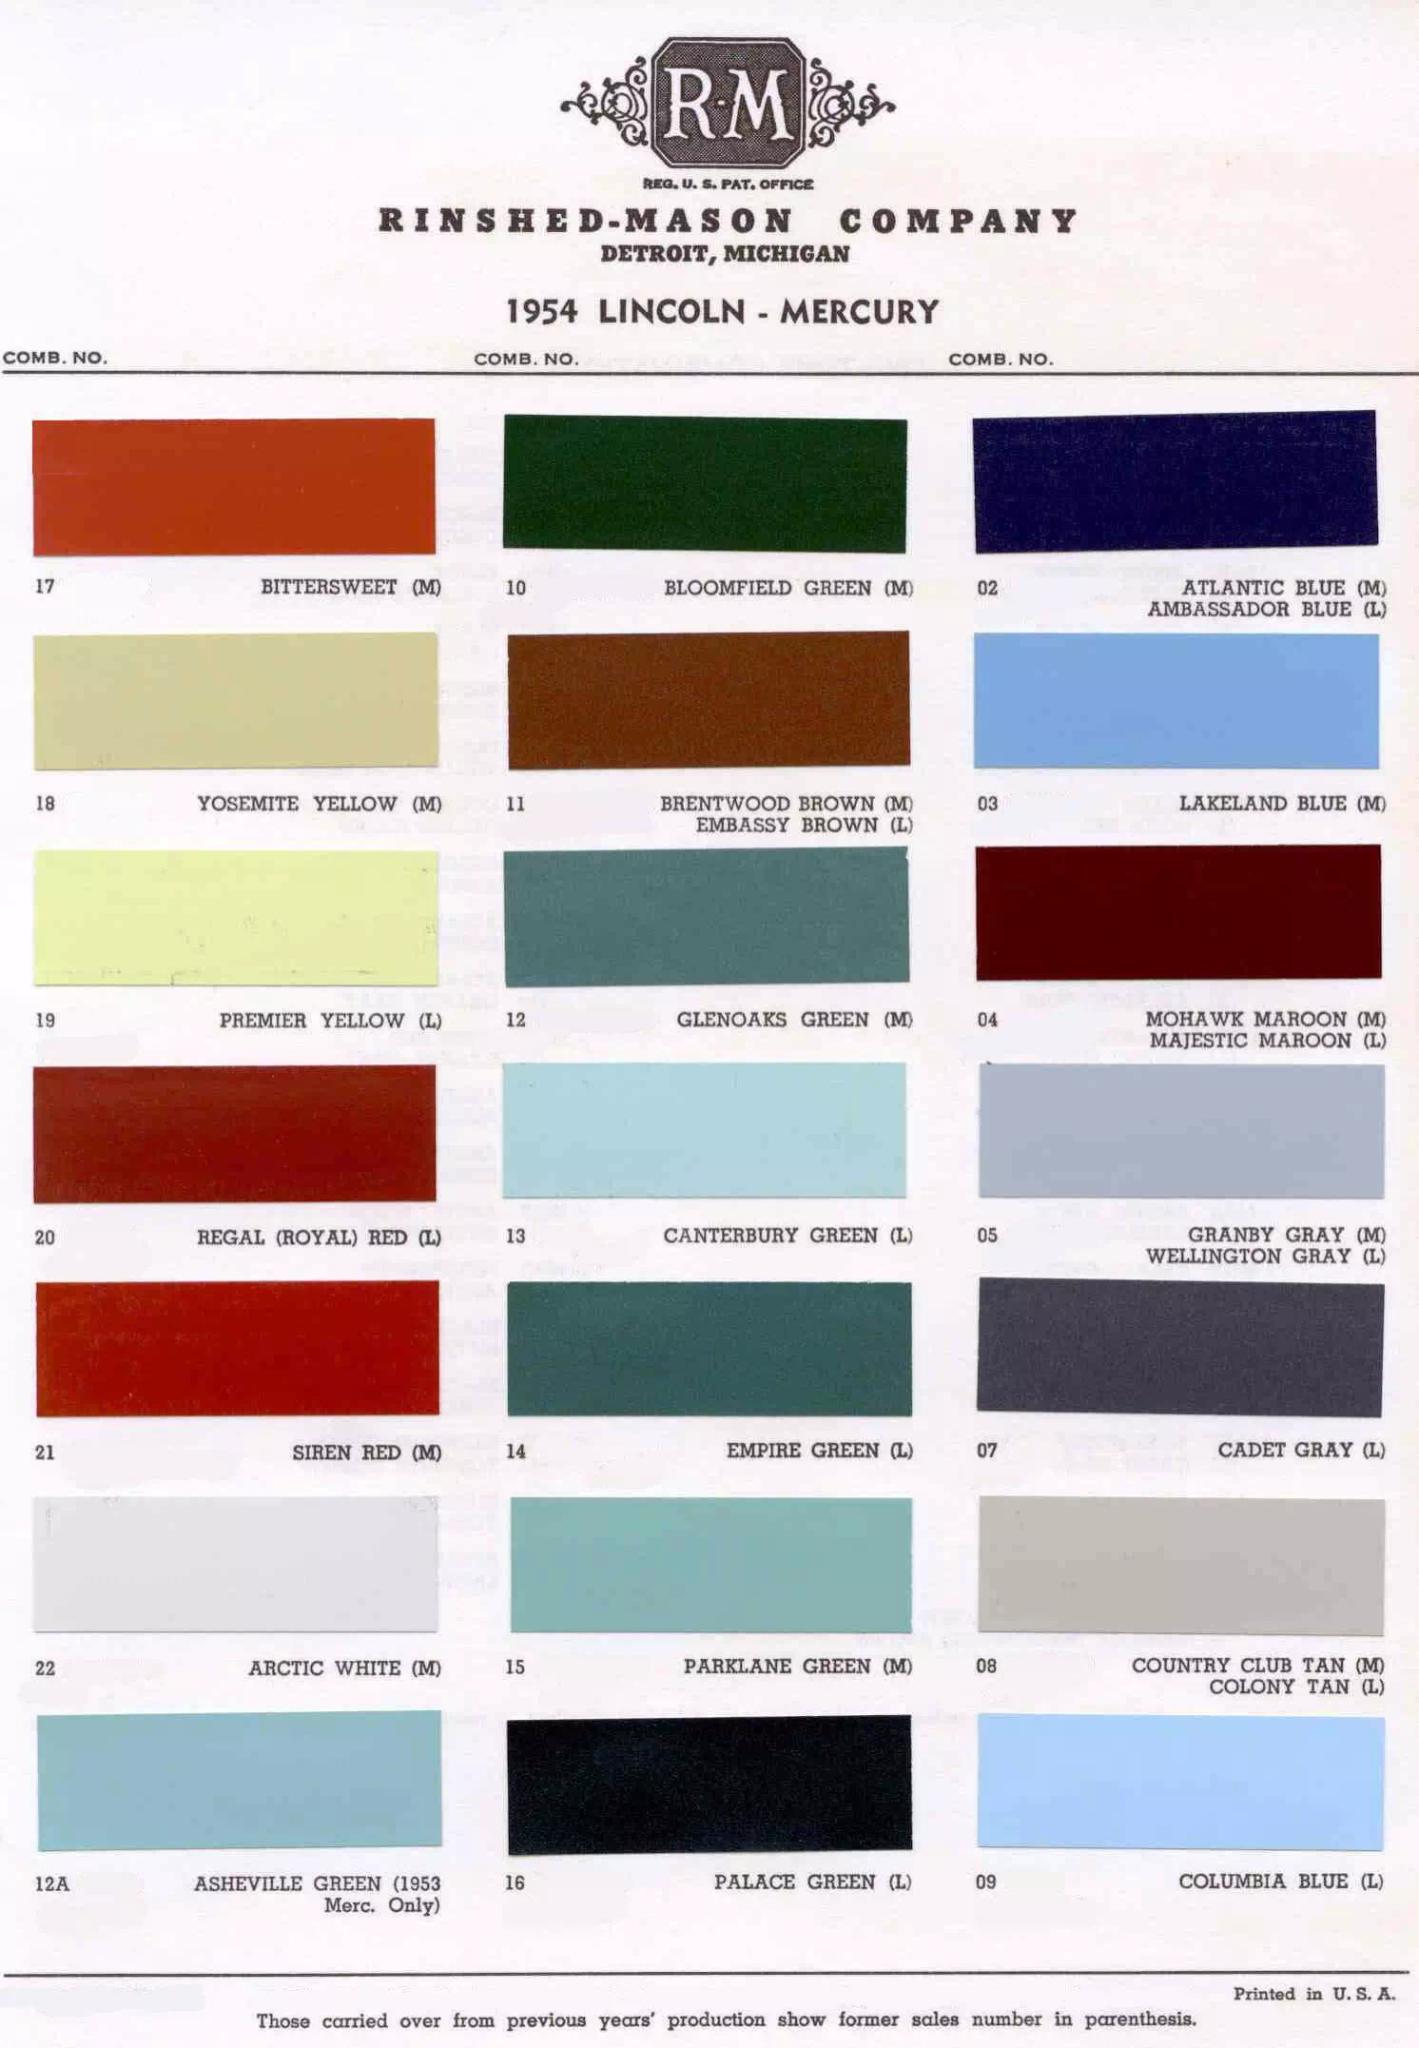 exterior colors, thier codes, and example swatches used on the exterior of the vehicles in 1954